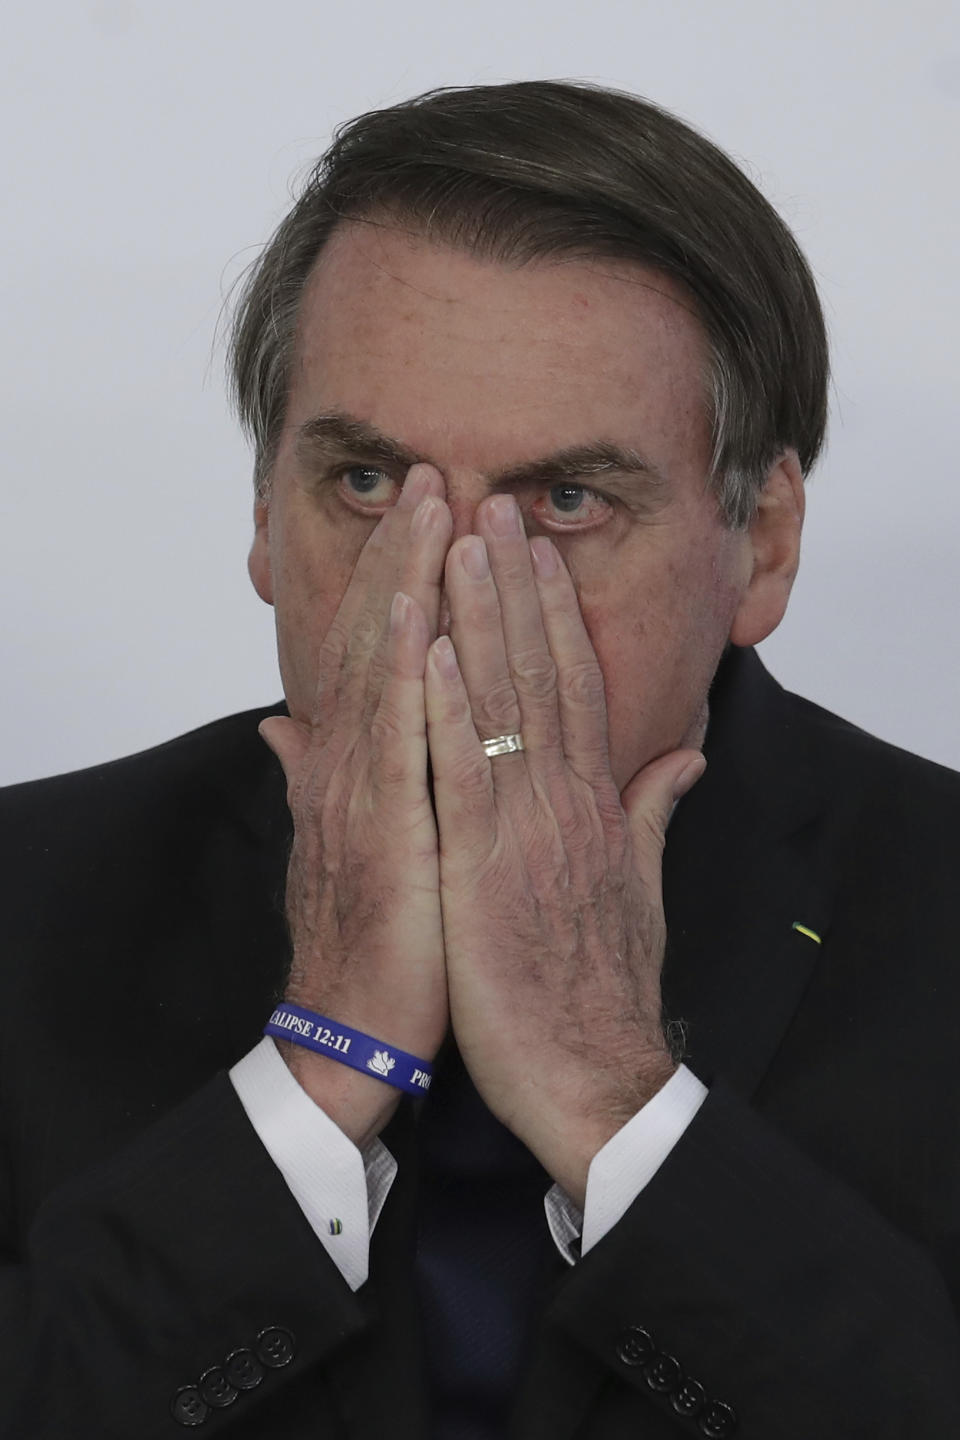 Brazil's President Jair Bolsonaro covers his face during ceremony at the Planalto Presidential Palace in Brasilia, Brazil, Monday, March 25, 2019. Brazil's president says he is "open to dialogue" about an ambitious pension reform that has become a central pillar of his administration's agenda. (AP Photo/Eraldo Peres)